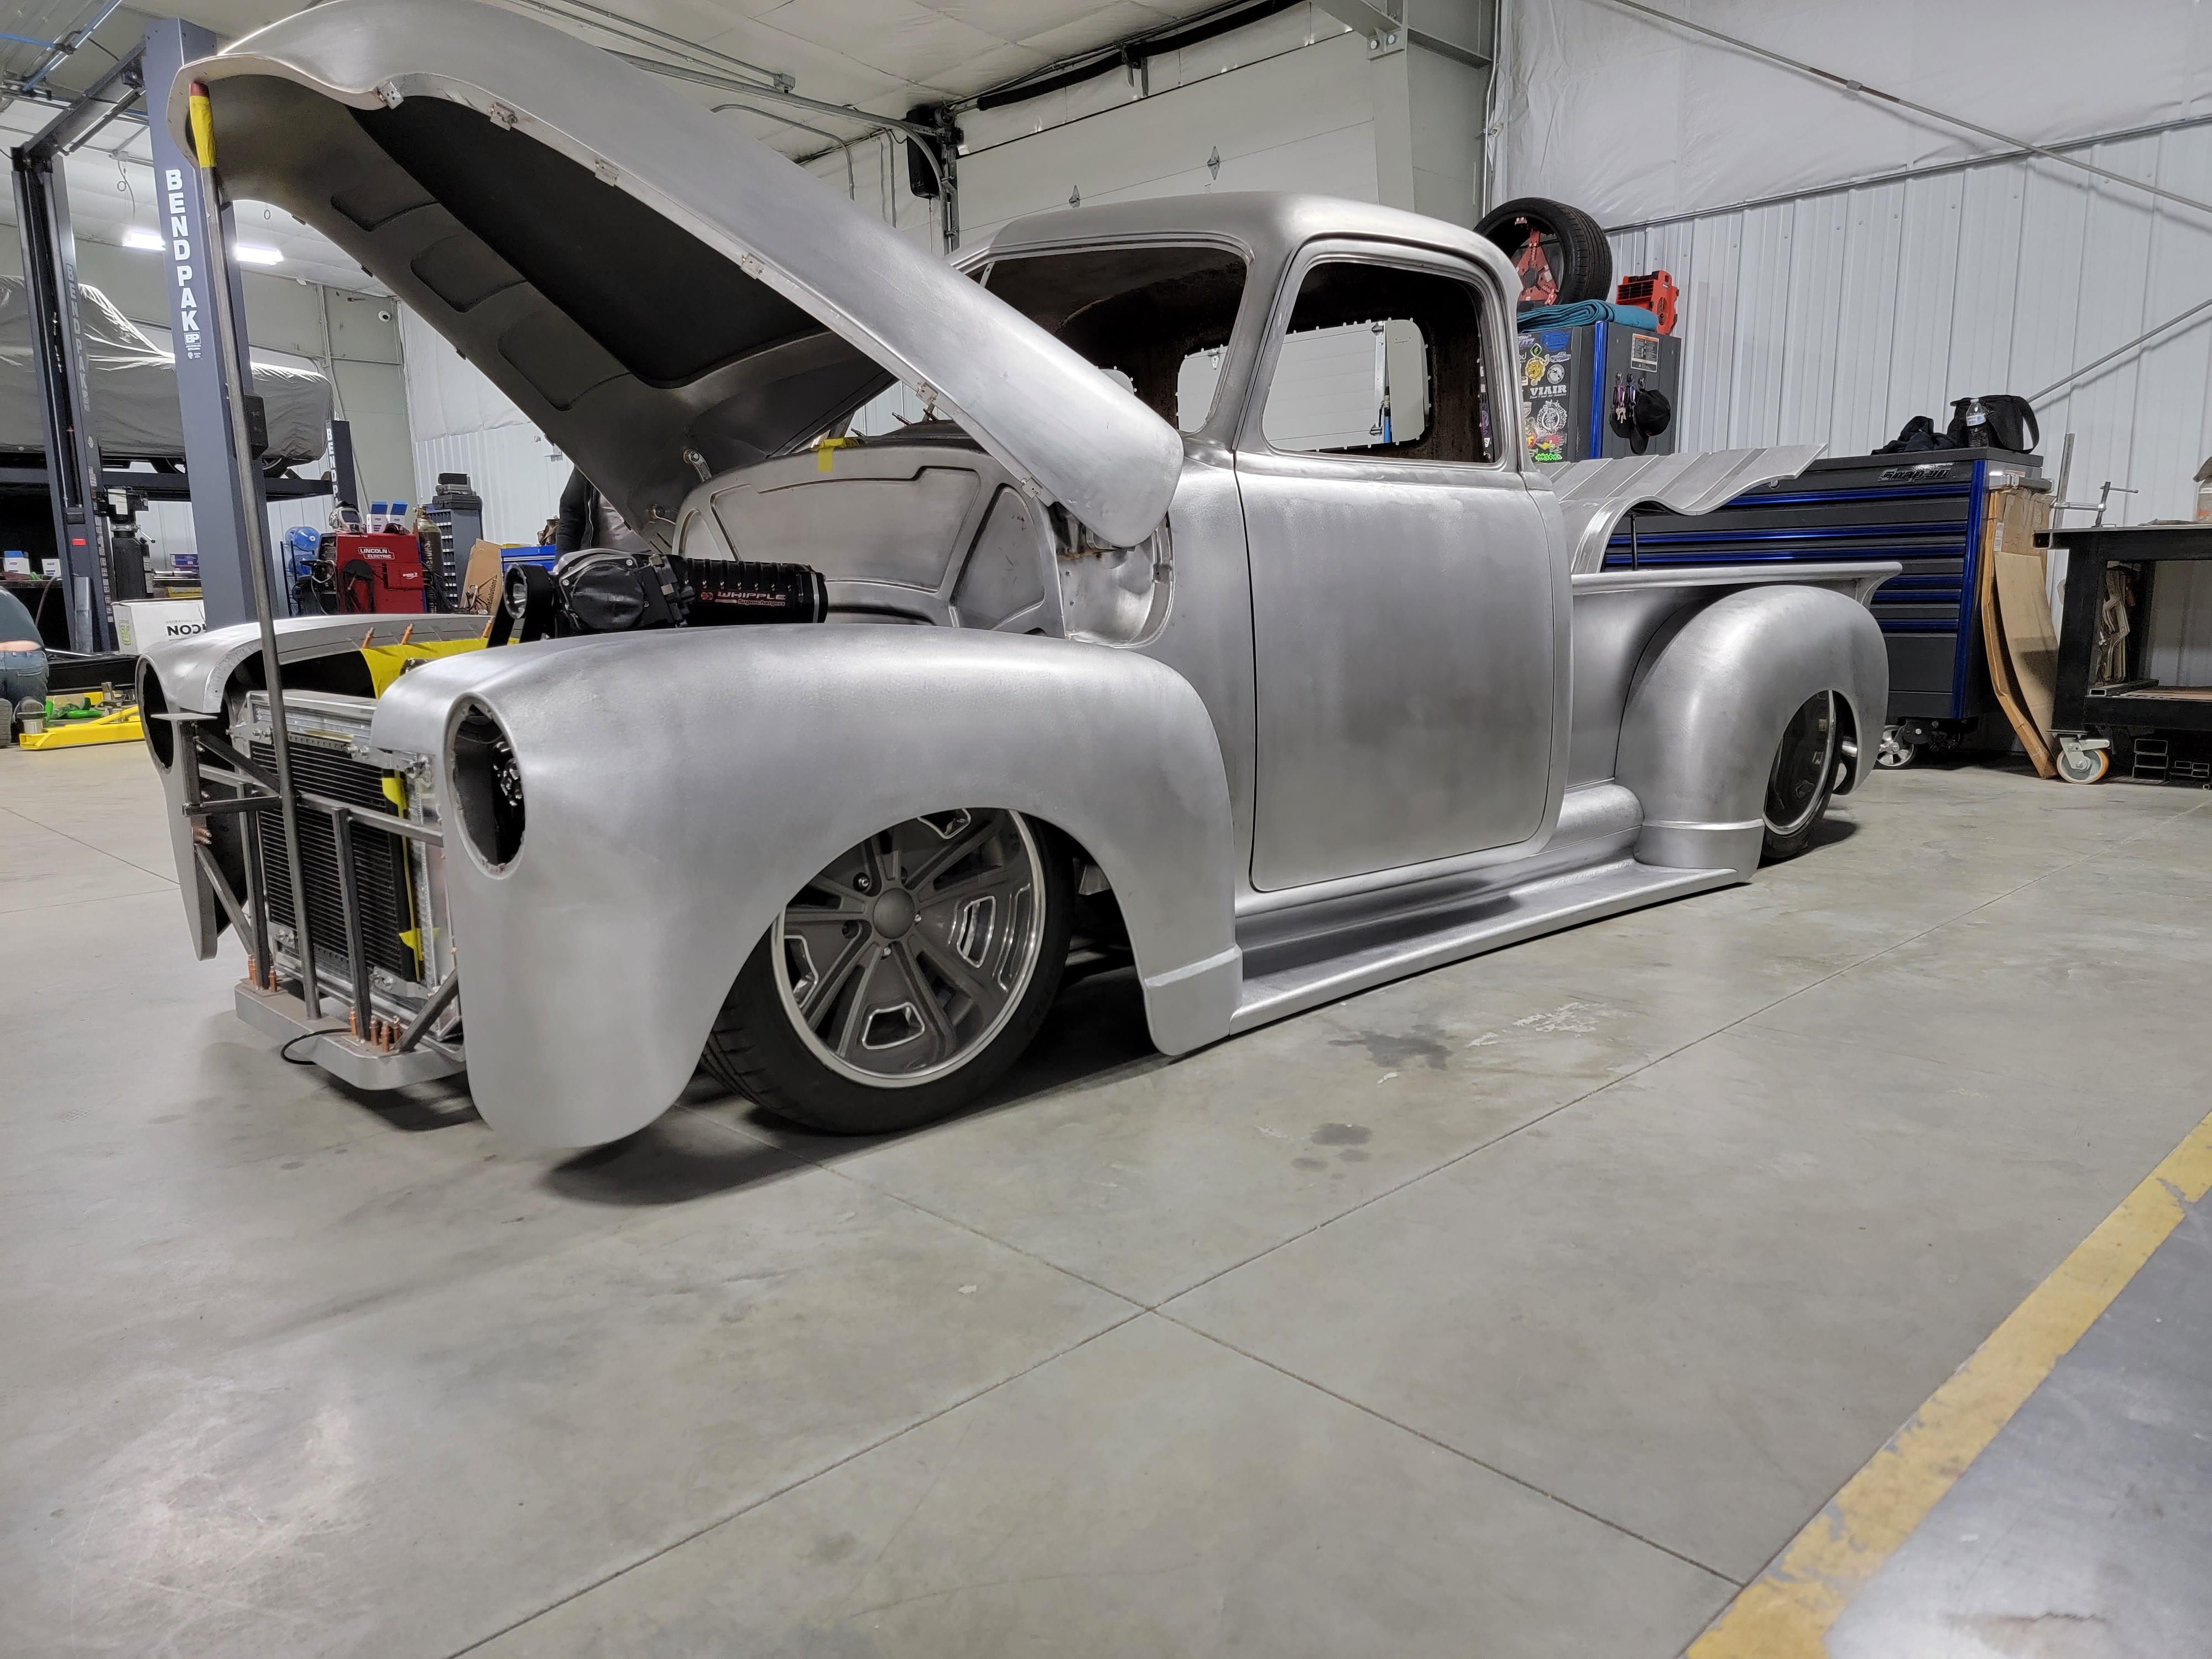 scotts-hotrods-51-chevy-project-truck-2602